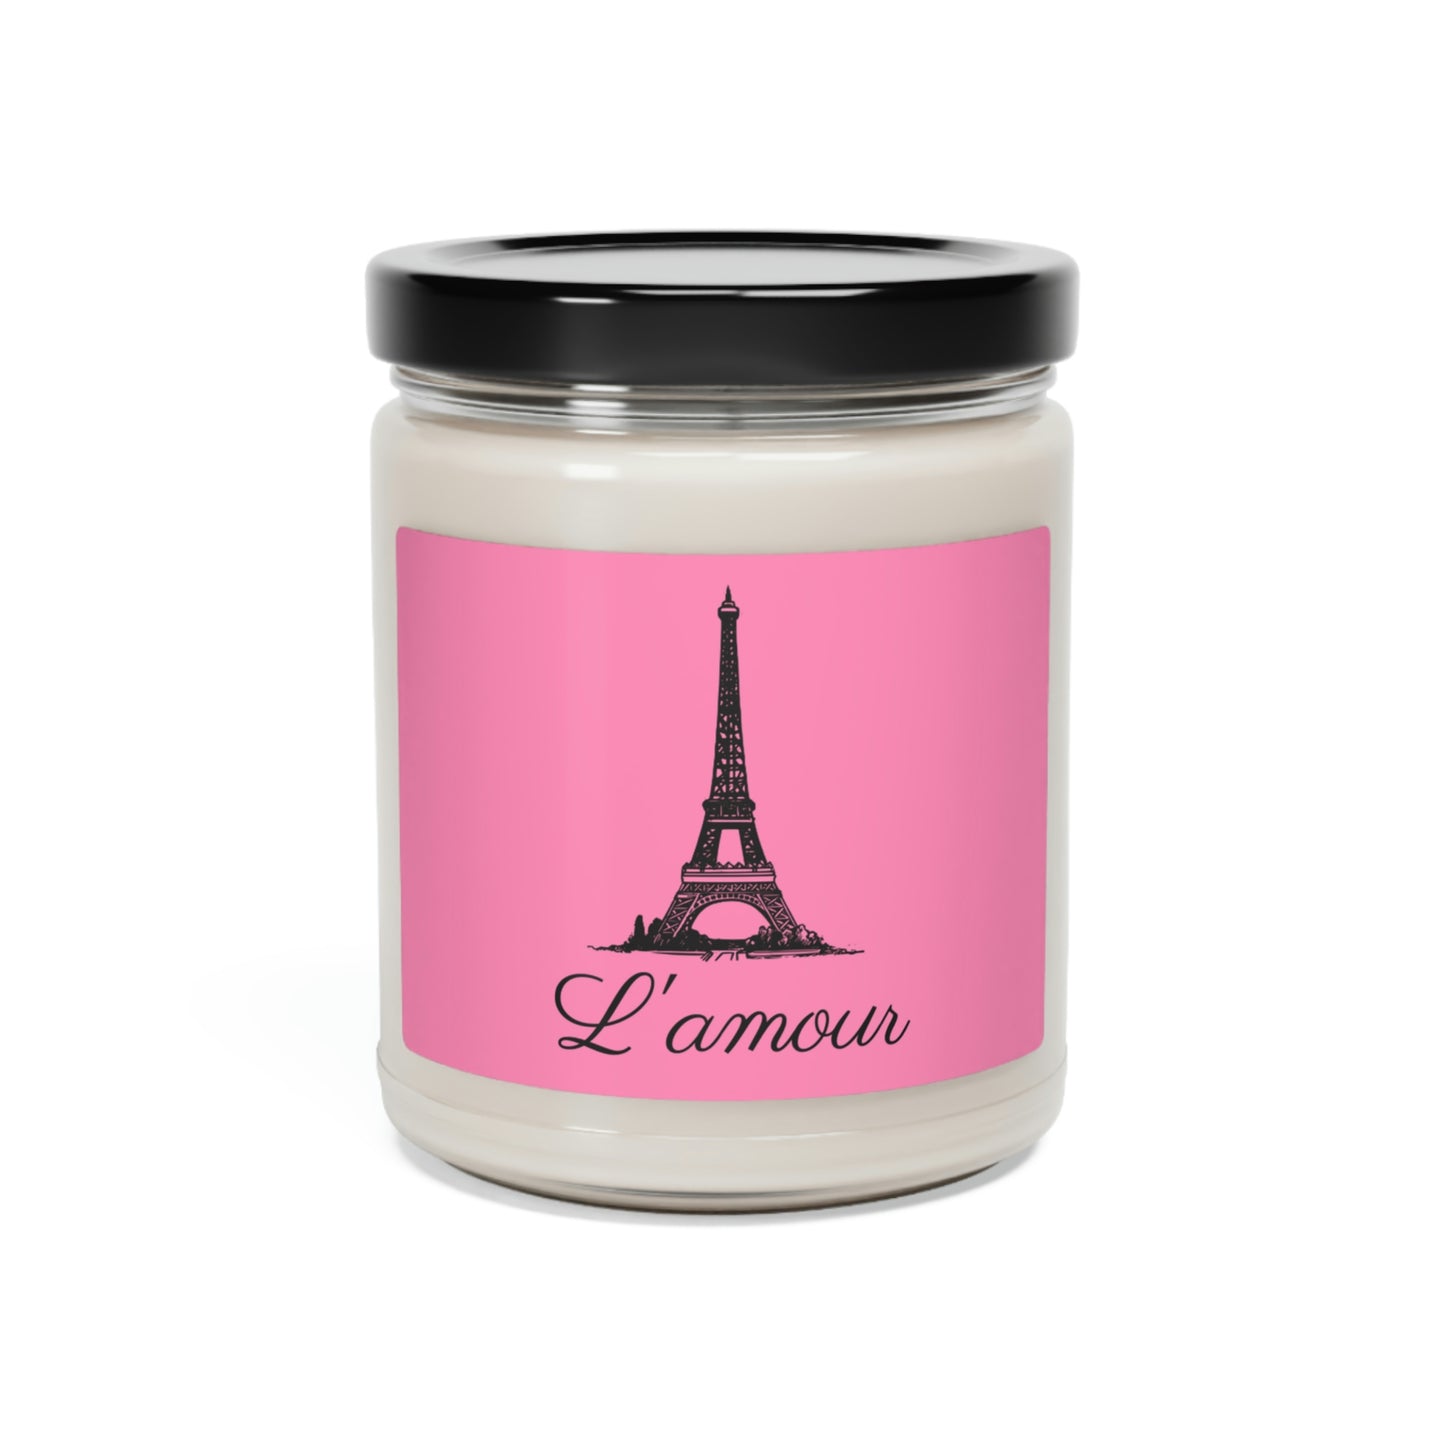 L'amour Scented Soy Candle, 9oz